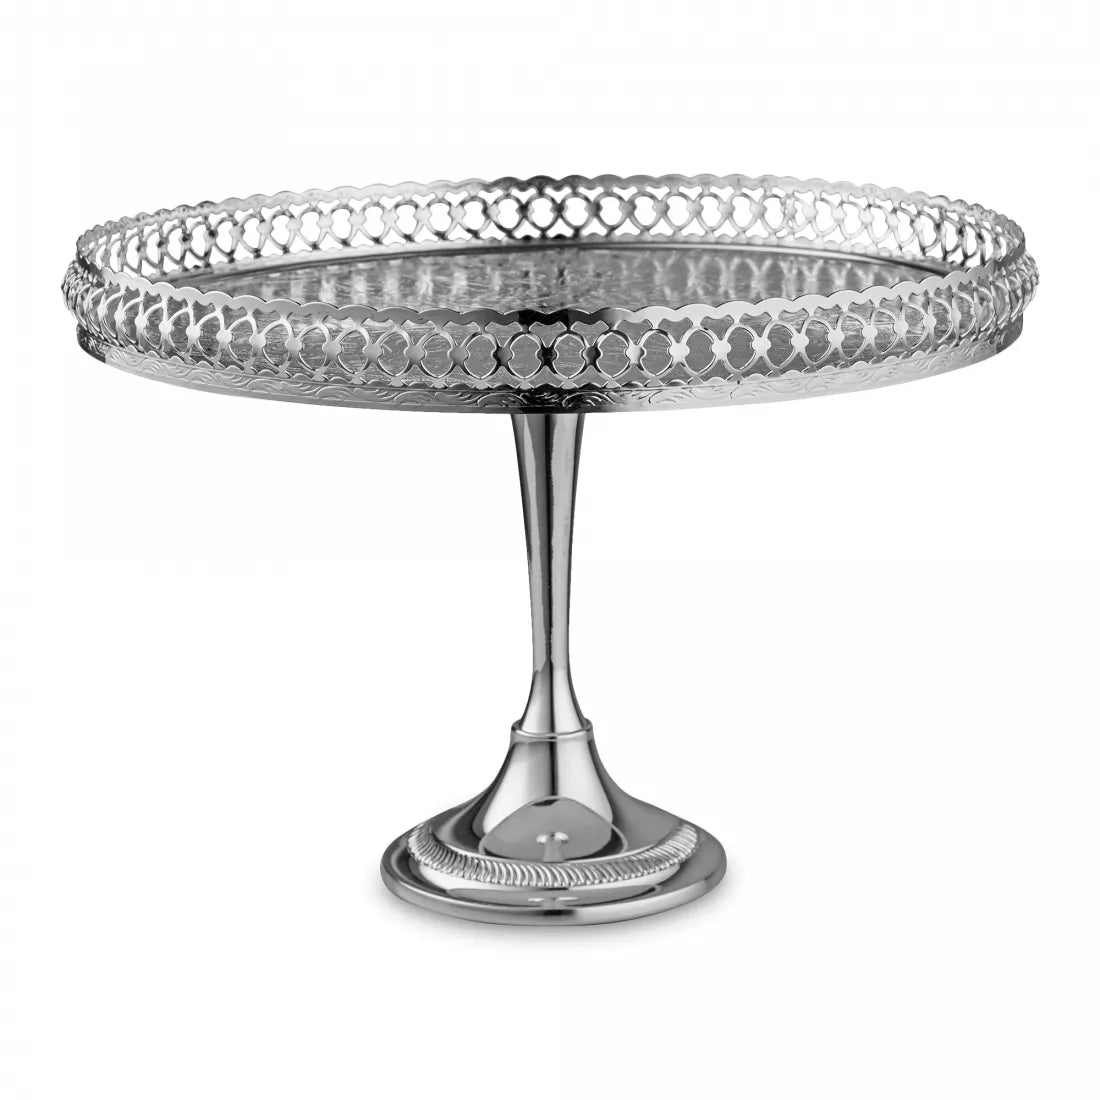 Queen Anne Cake Dish On A Leg Stainless Steel, Silver Small